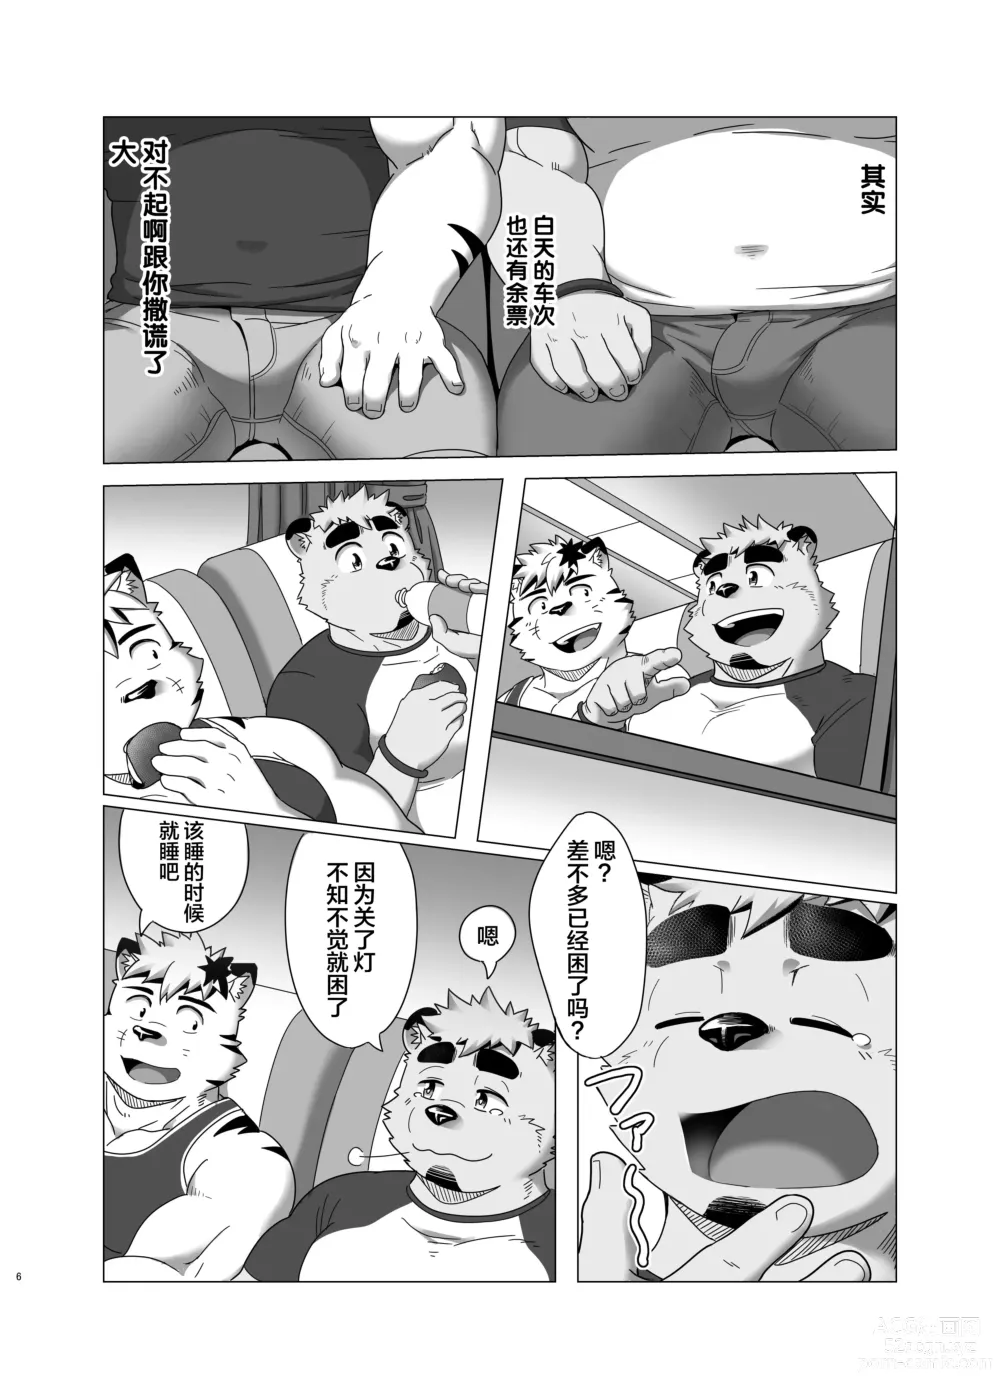 Page 5 of doujinshi MIDNIGHT APPROACH